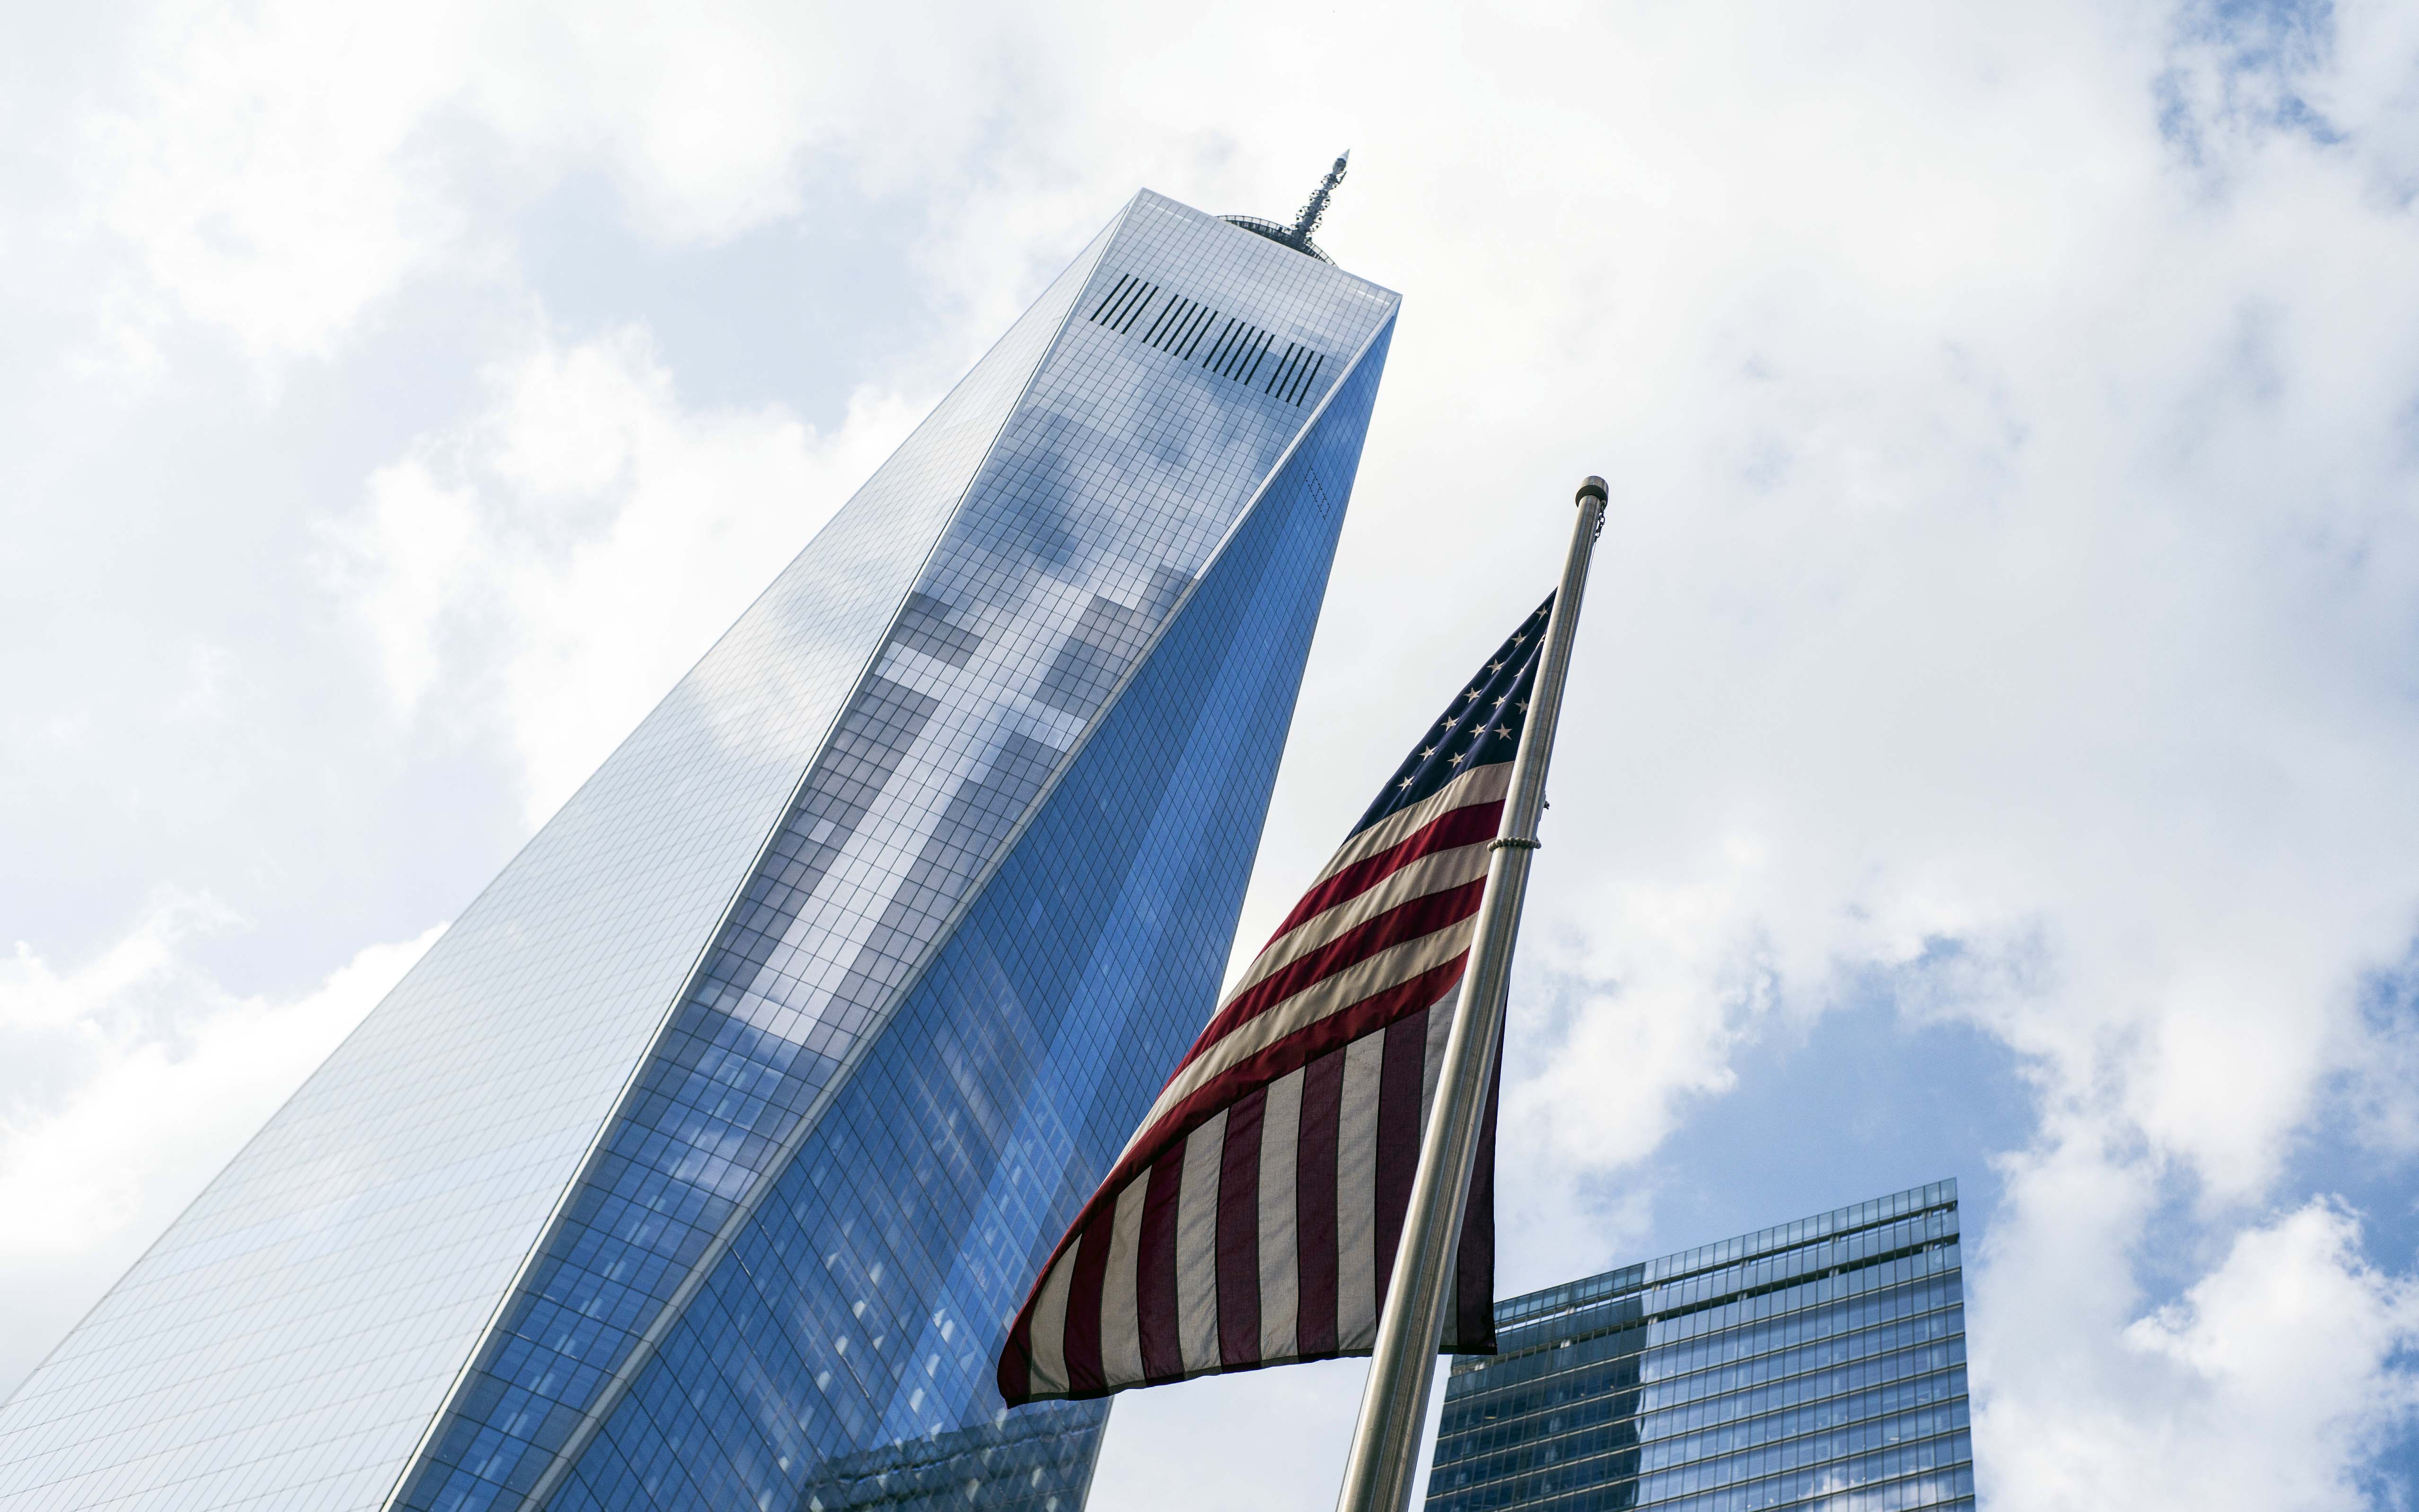 An American flag flies over the 9/11 Memorial in this image looking up at One World Trade Center on a cloudy day. The clouds are seen reflecting off the glass of One World Trade Center.